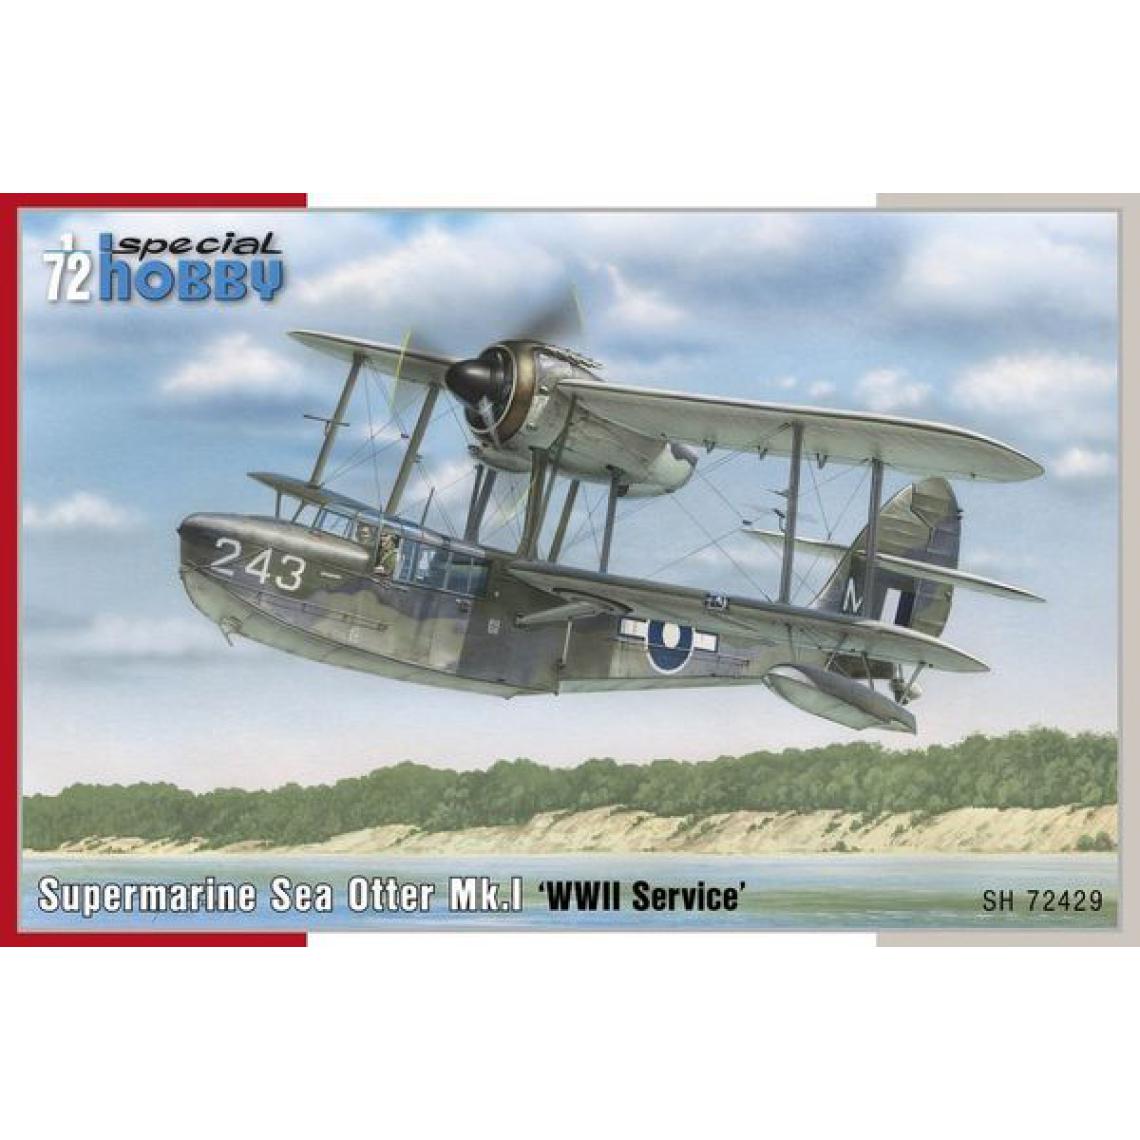 Special Hobby - Supermarine Sea Otter Mk.I 'WWII Service' - 1:72e - Special Hobby - Accessoires et pièces